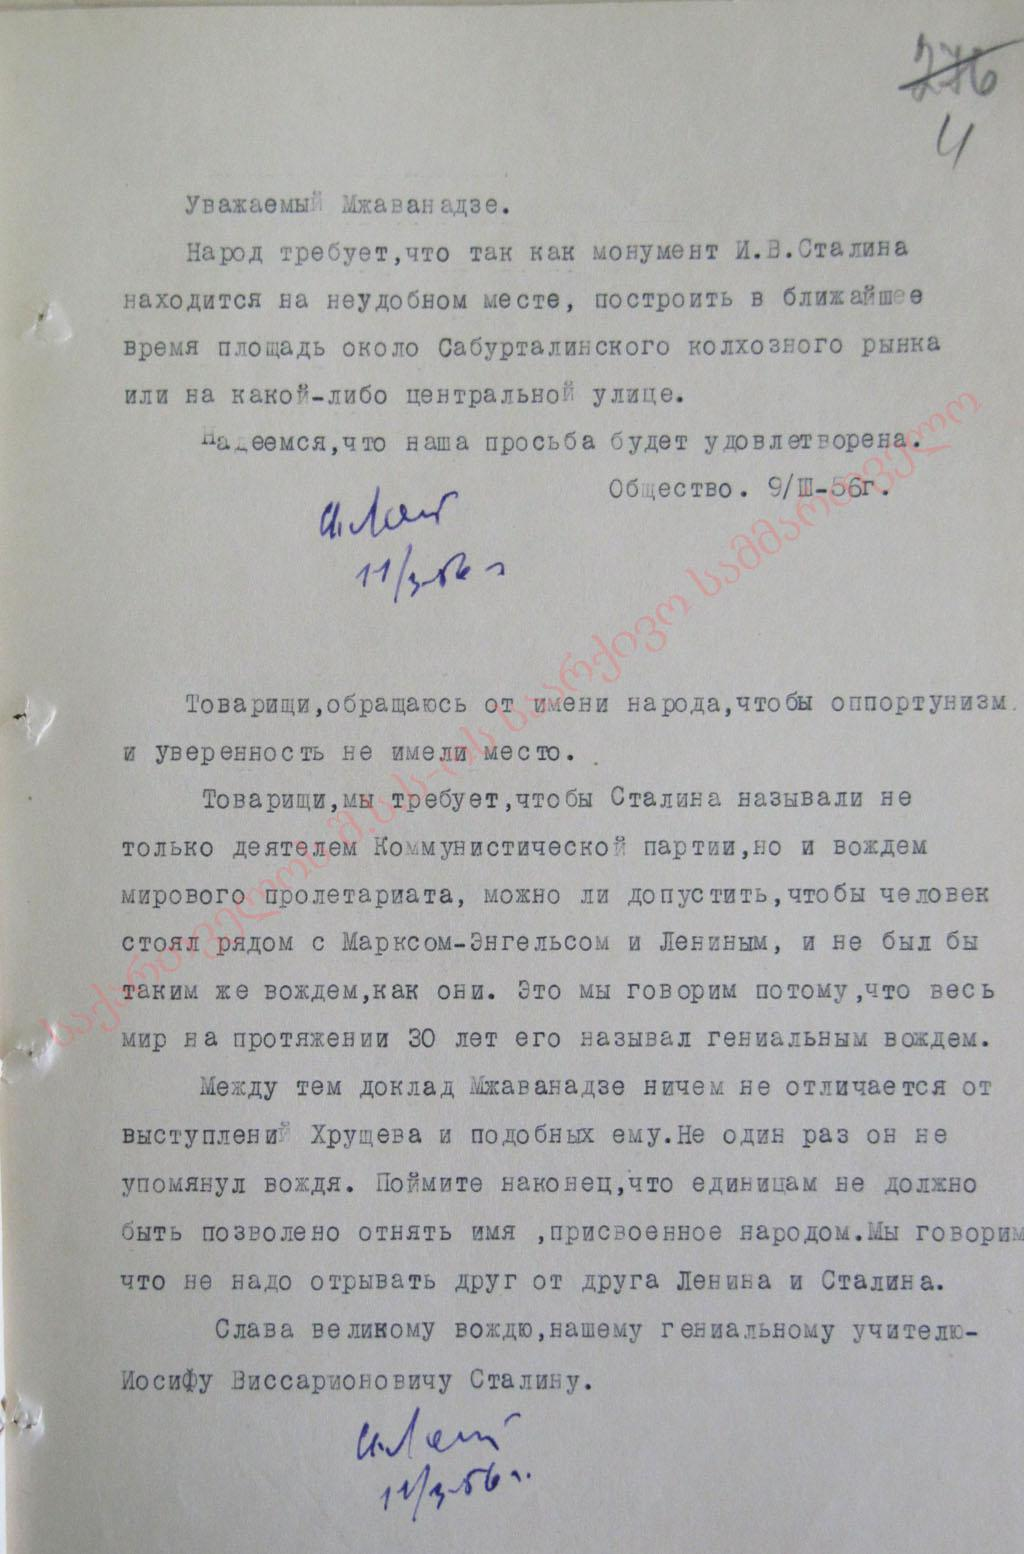 Notes and letters taken away from the activists that came to the Central Committee of Communist Party of Georgia.